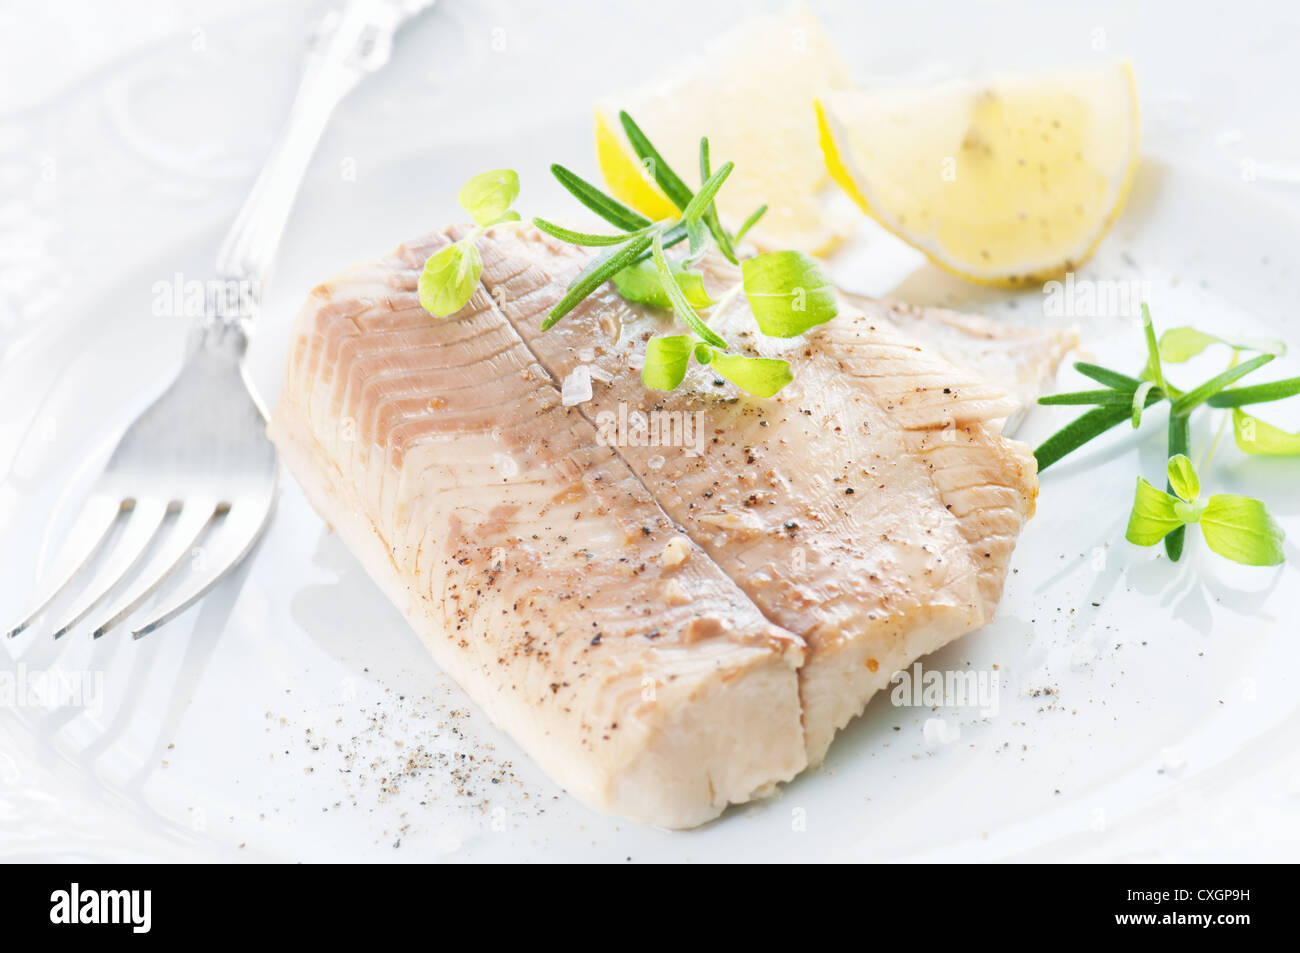 Trout fillet with spices Stock Photo